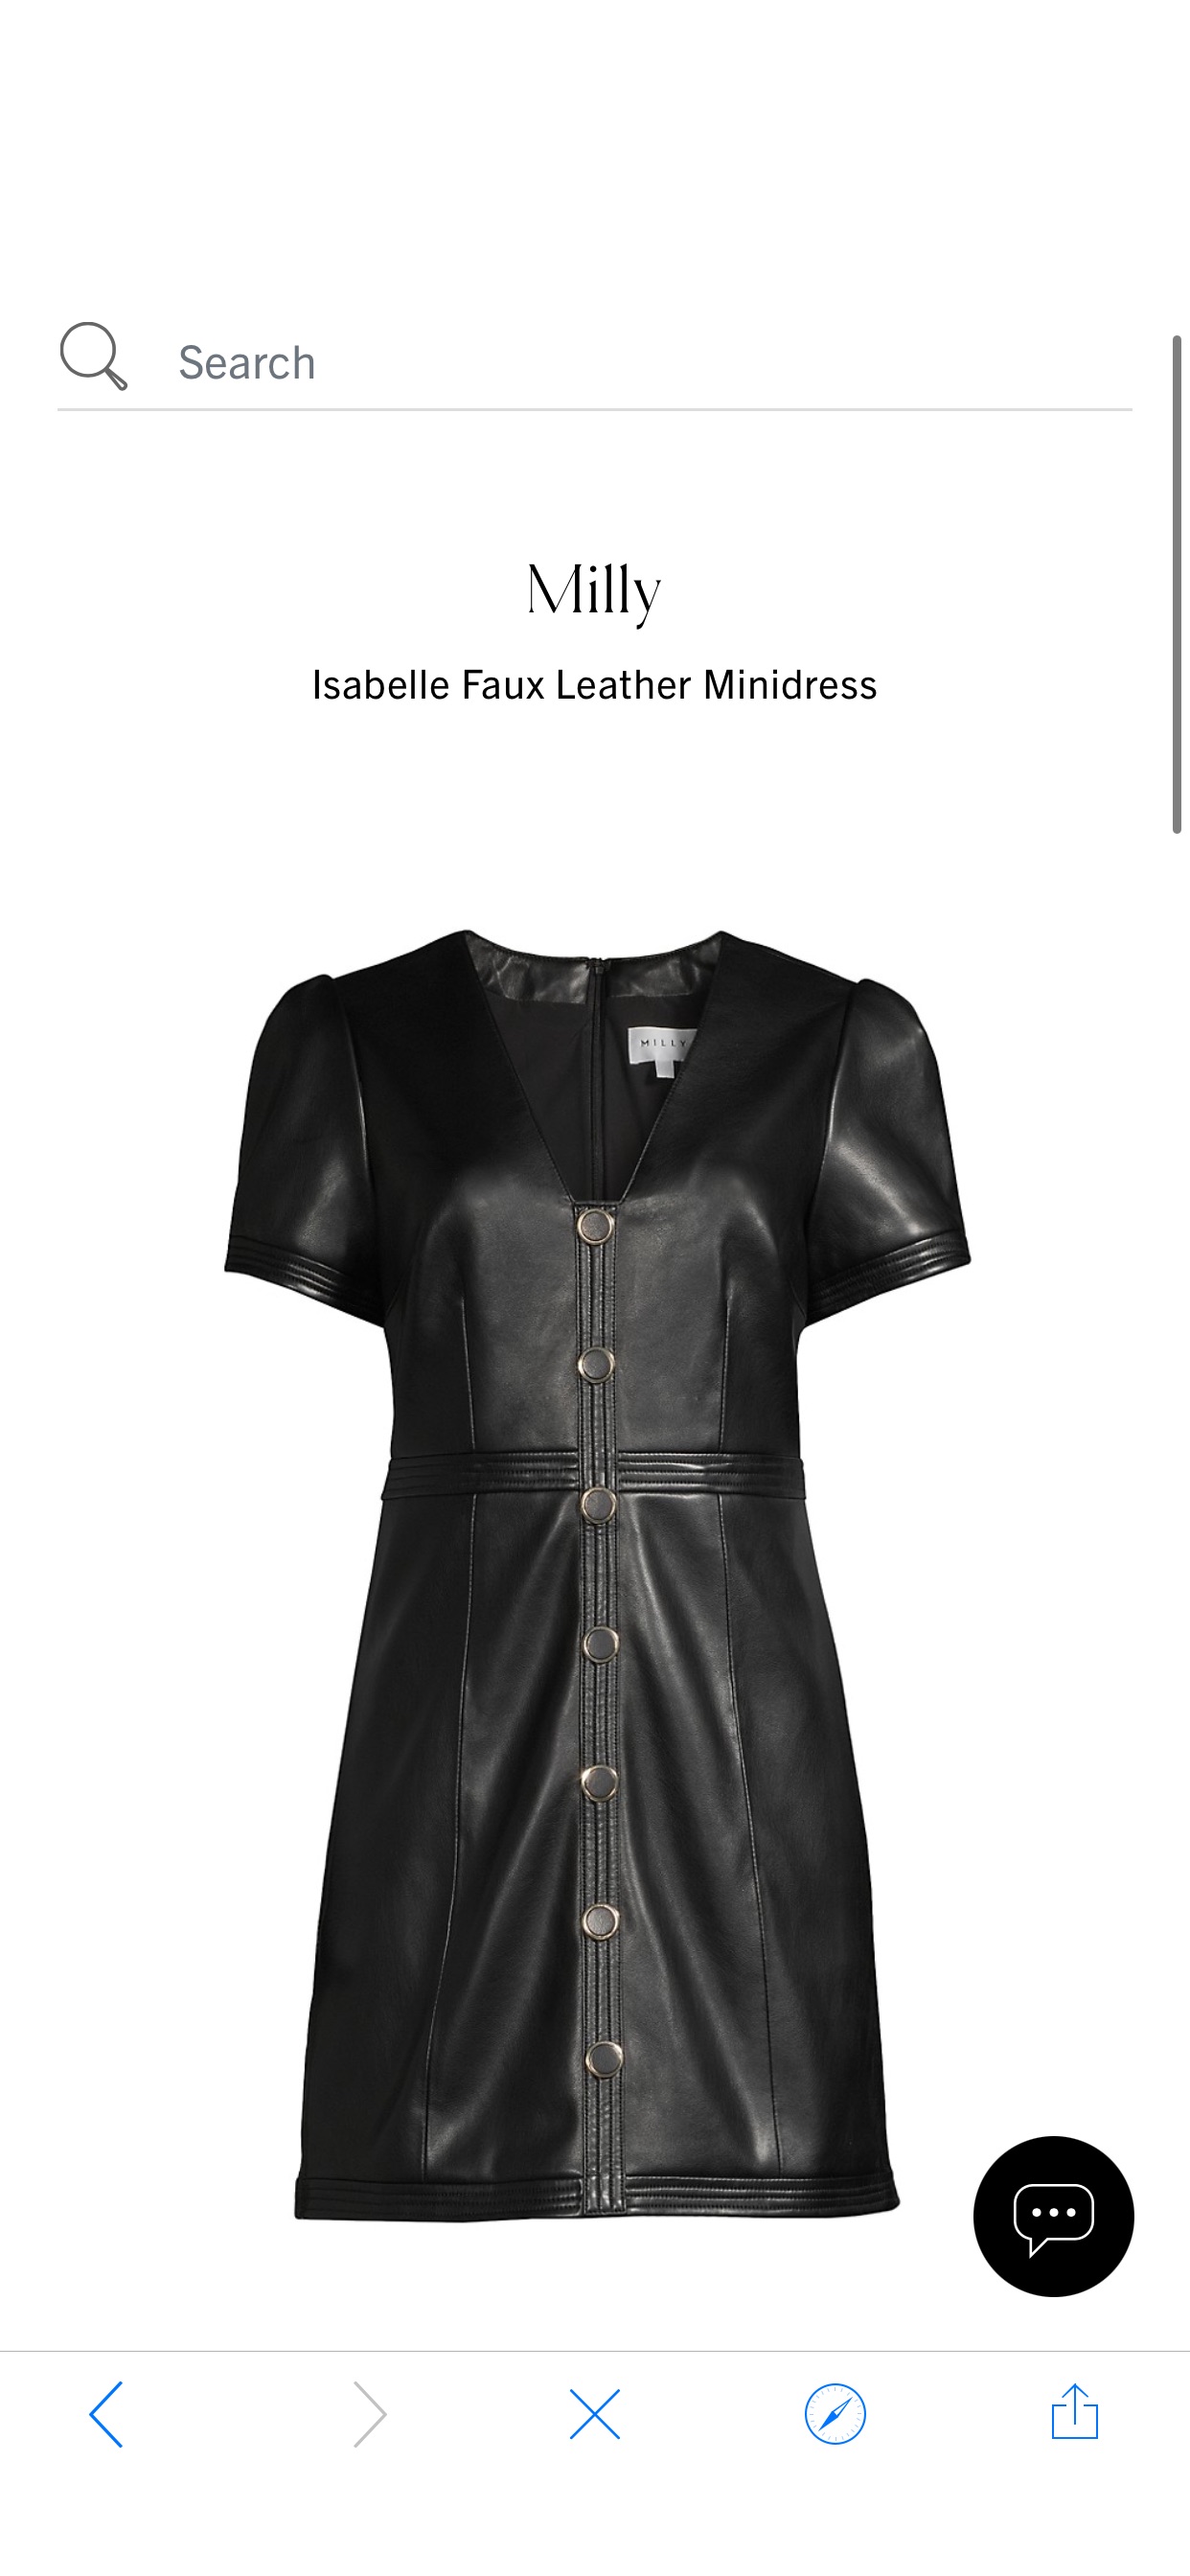 Shop Milly Isabelle Faux Leather Minidress | Saks Fifth Avenue